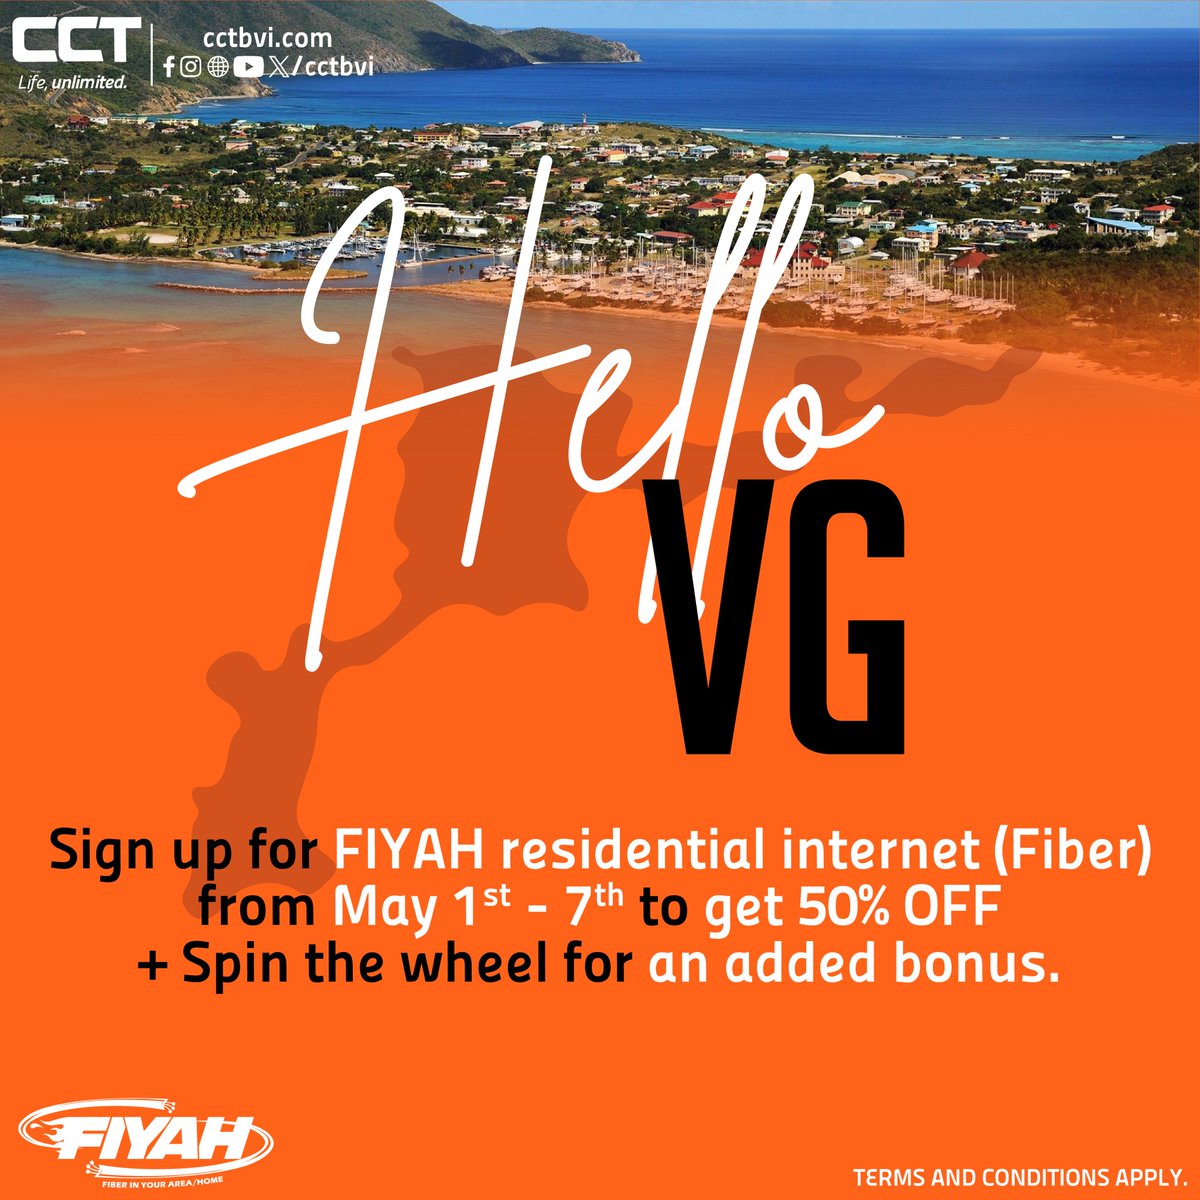 📷FIYAH is now available in Virgin Gorda.️
Head to our Virgin Gorda location from May 1st to 7th and sign up for FIYAH Residential Fiber Internet to get 50% off your first month + spin the wheel for a chance to win an added bonus! #cctlifeunlimited #lifeunlimited #FIYAH #CCTLive